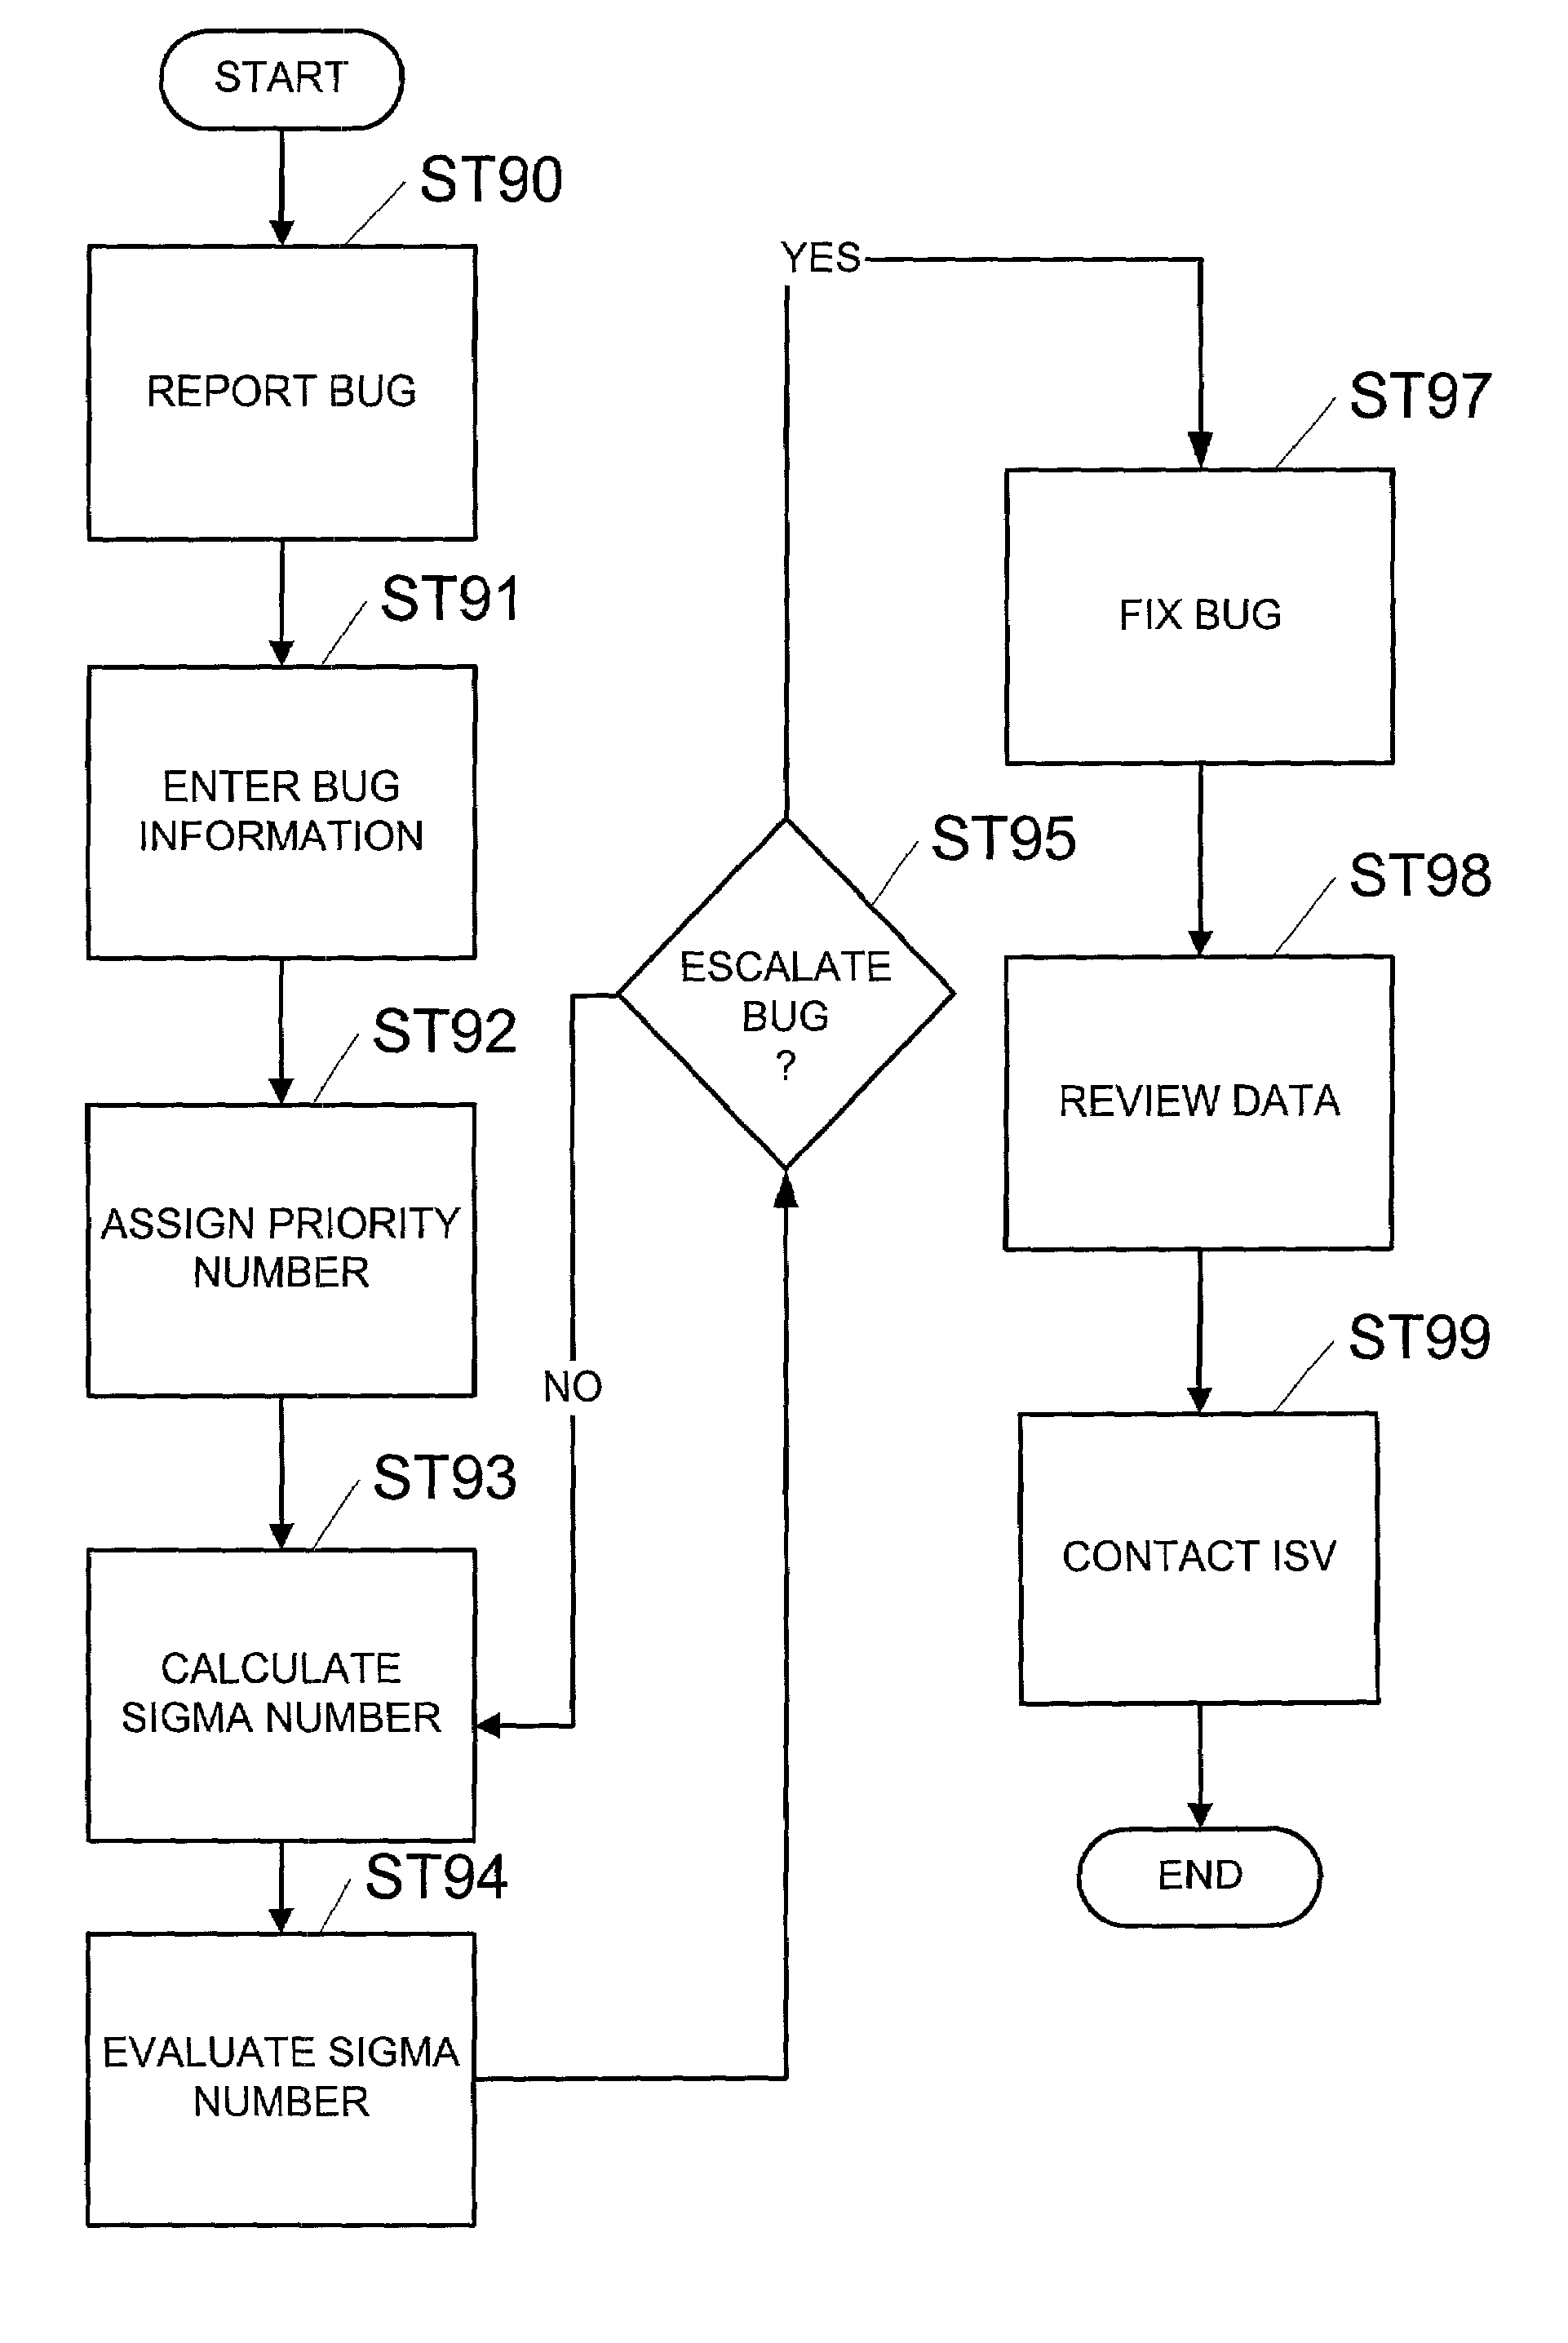 Rating apparatus and method for evaluating bugs